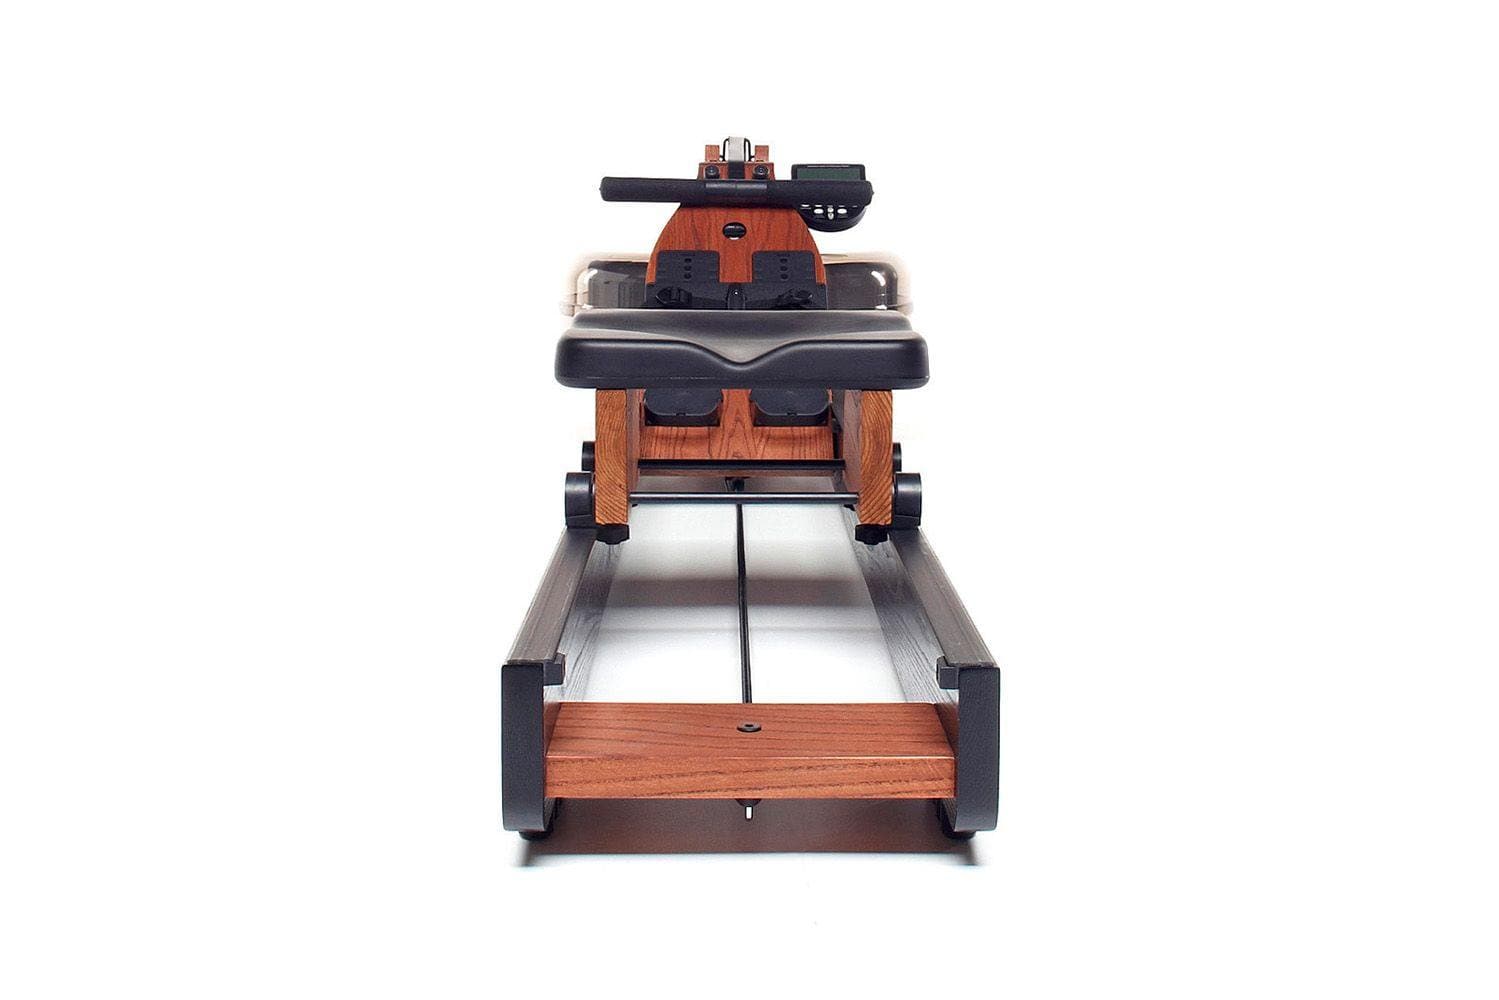 WaterRower Club with S4 Monitor - Musclemania Fitness MegaStore